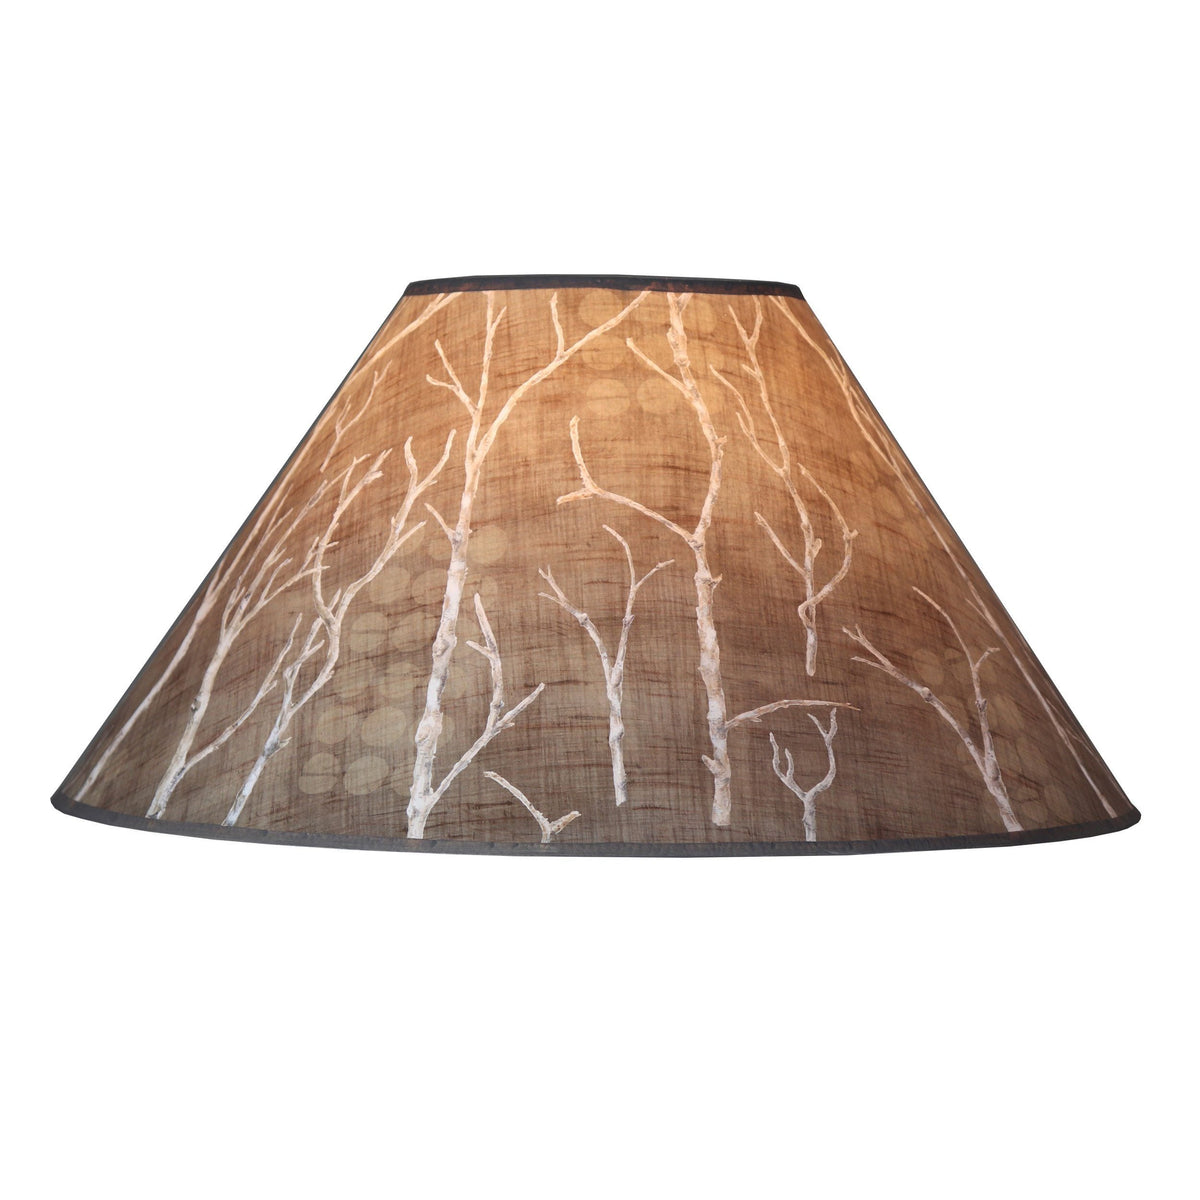 Janna Ugone &amp; Co Lamp Shades Large Conical Lamp Shade in Twigs